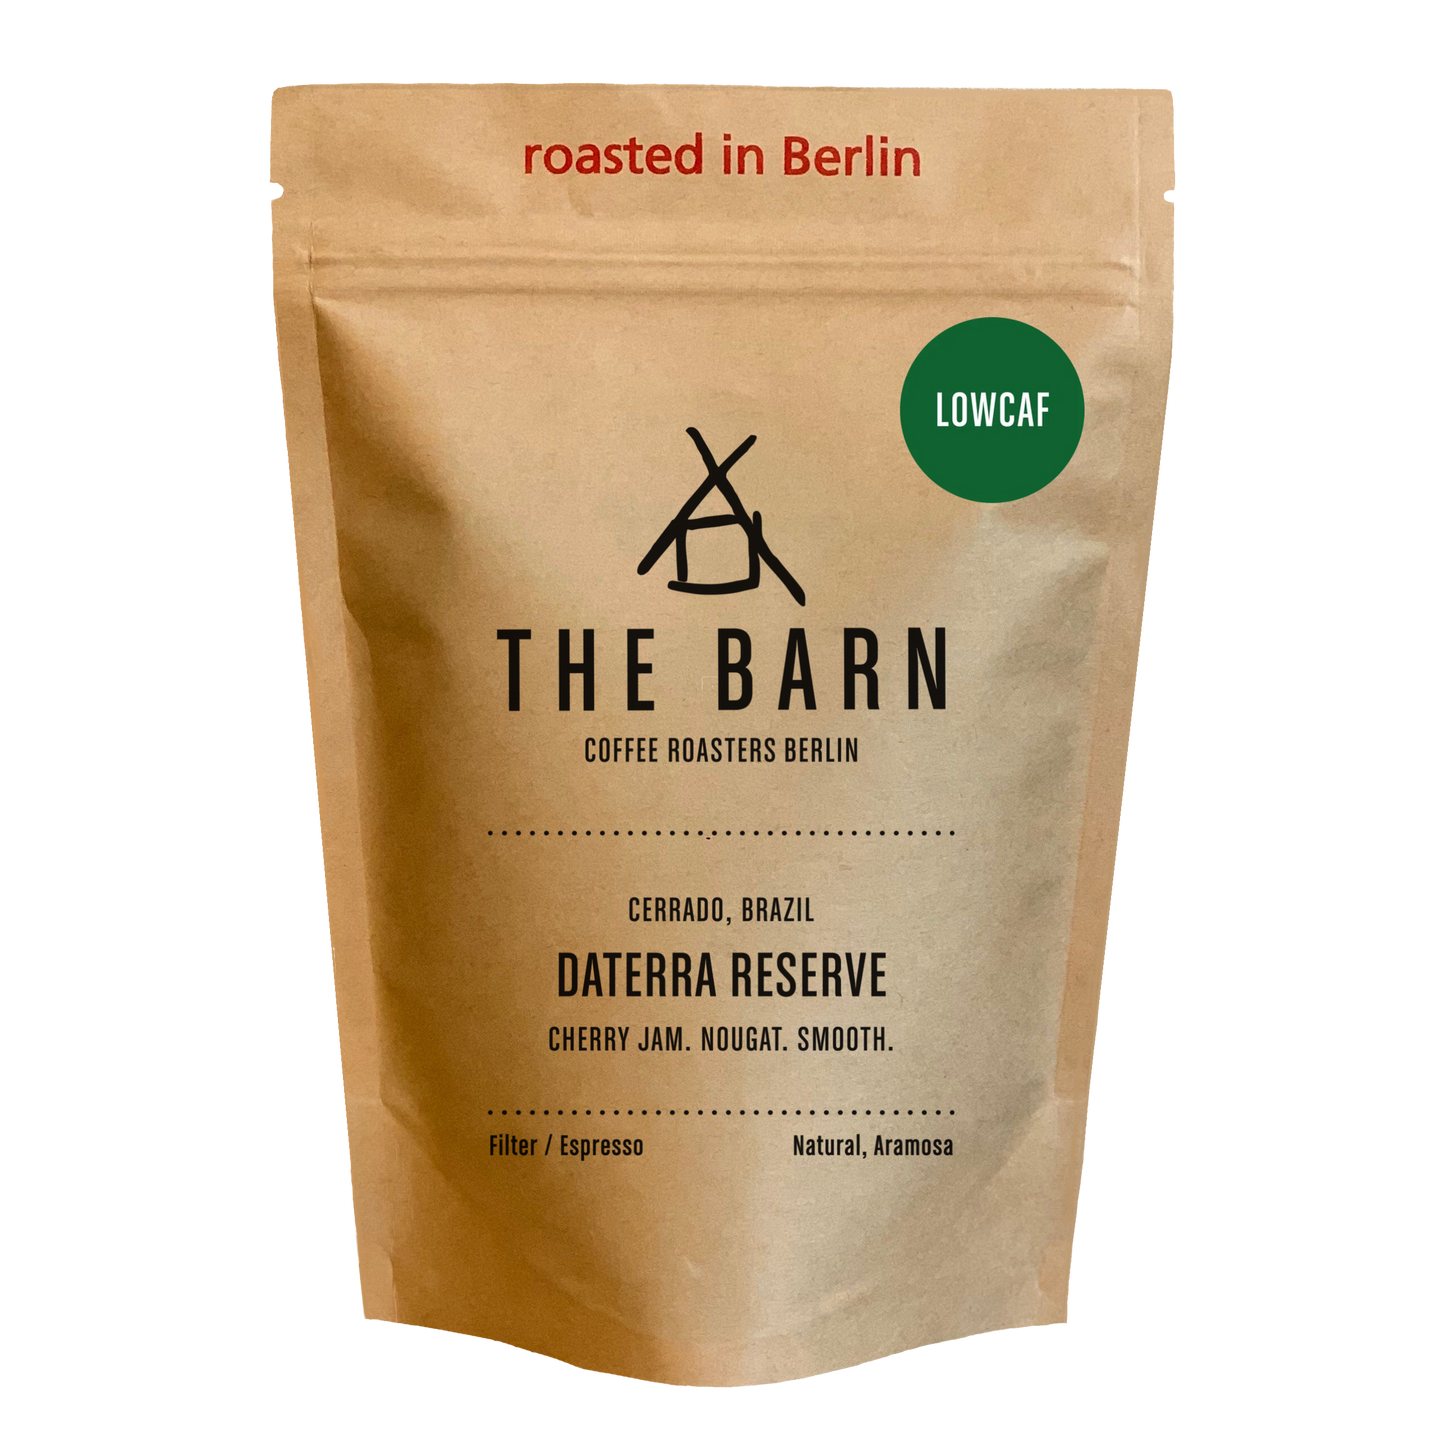 250 grams brown bag of Daterra Reserve, filter/espresso coffee beans